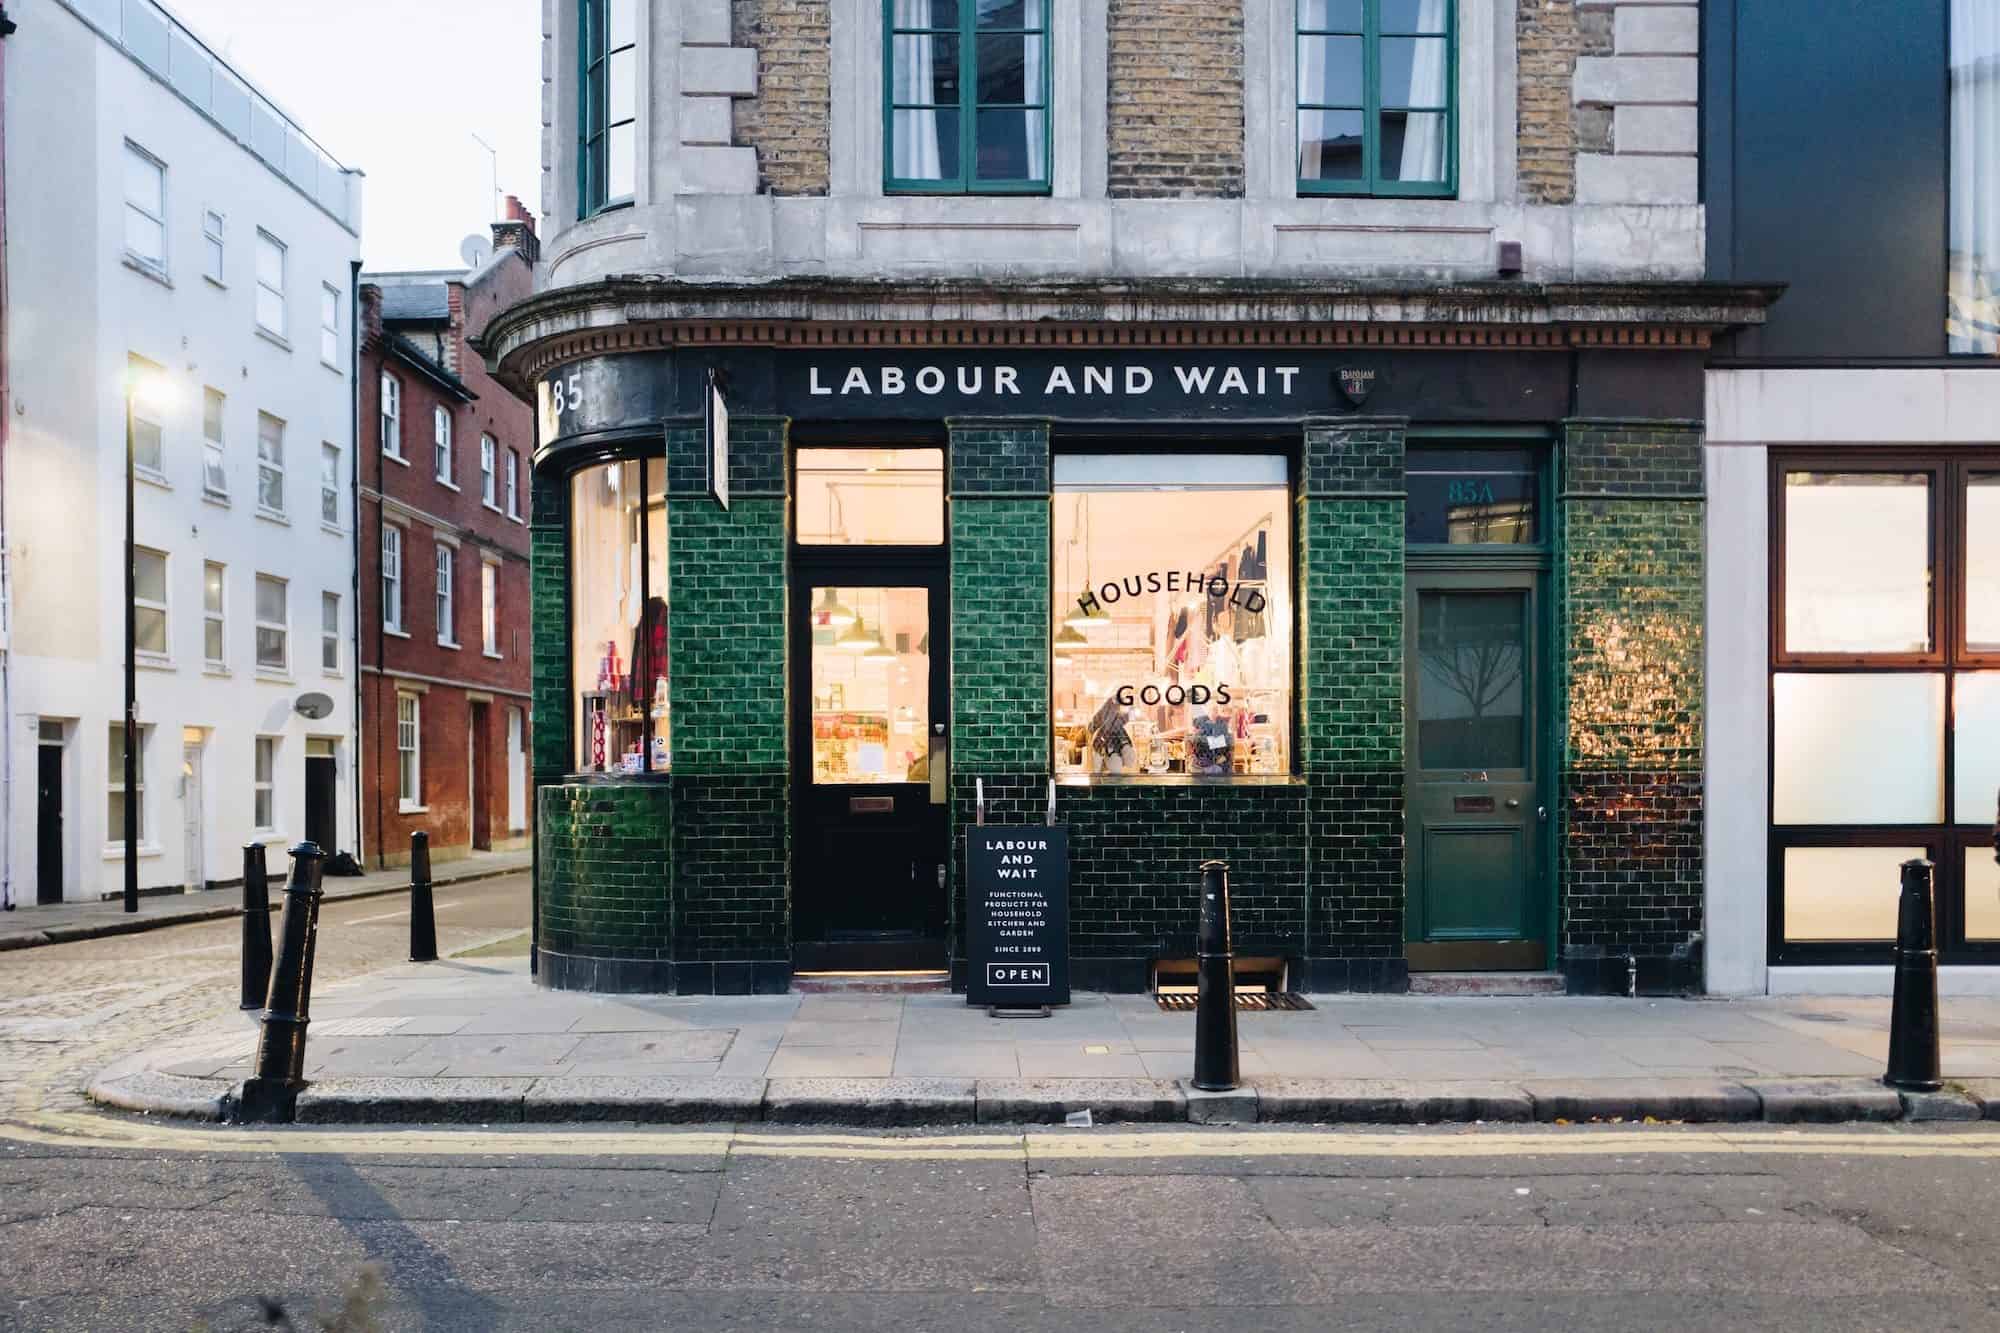 In East London, pubs have been converted into concept stores selling handmade goods like at Labour and Wait.